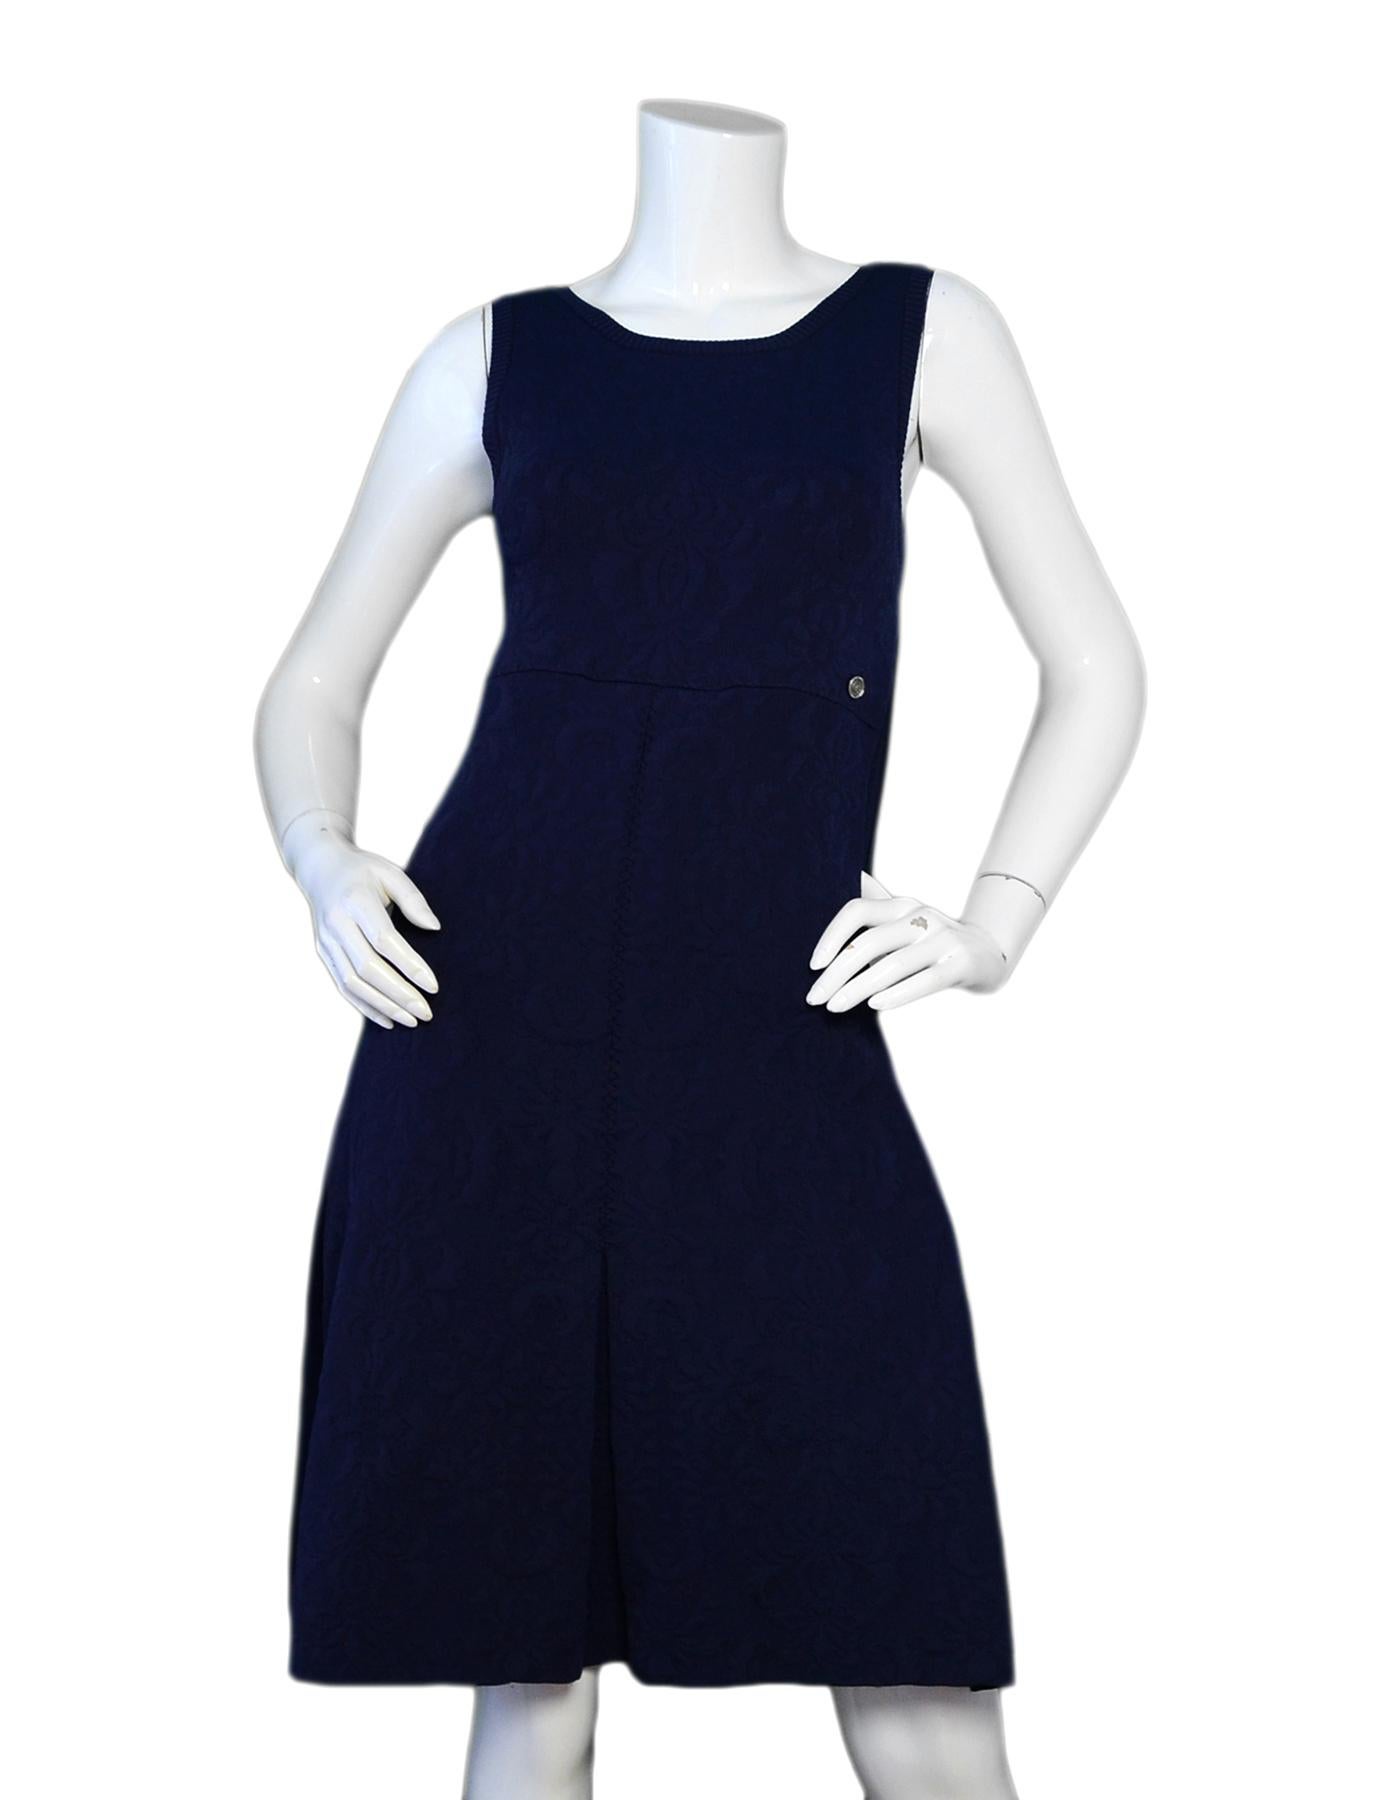 Chanel Navy Brocade Textured Sleeveless Skater Dress sz 36

Made In: France
Color: Navy blue
Materials: 56% viscose, 35% polypropylene, 9% polyamide
Opening/Closure: Side hidden zip closure
Overall Condition: Very good pre-owned condition, with seam